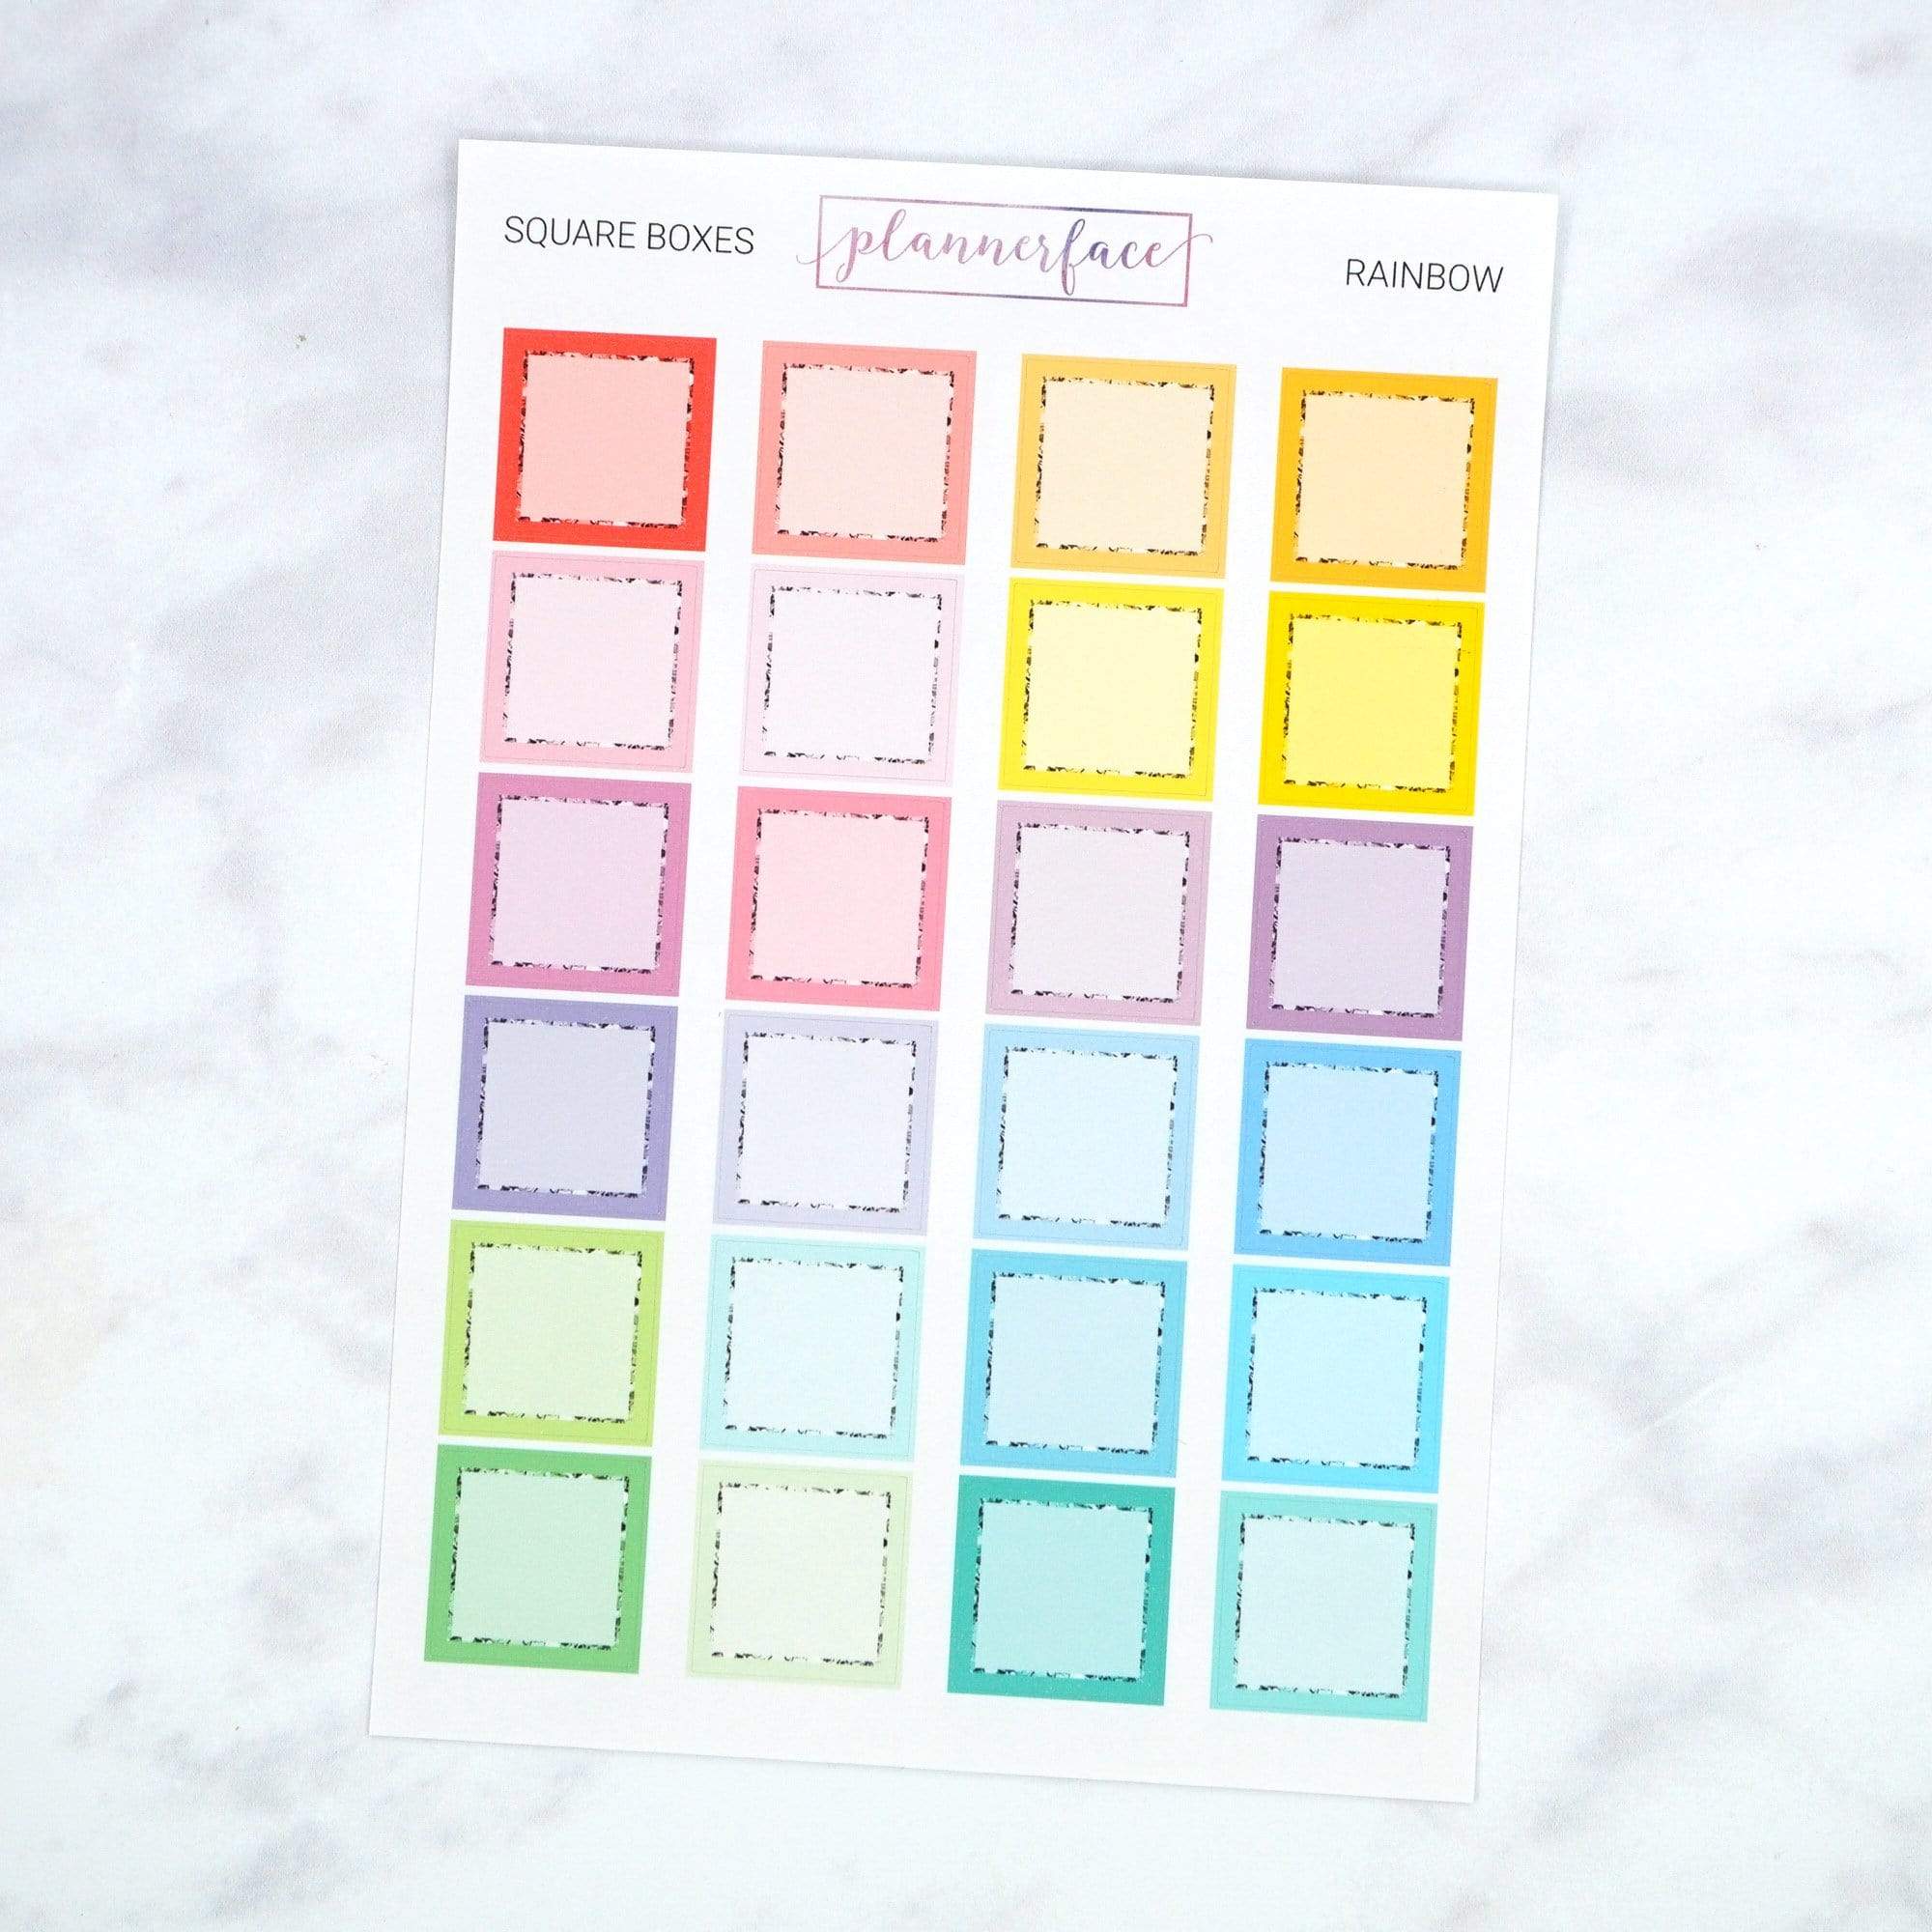 Square Boxes | Multicolour Rainbow by Plannerface